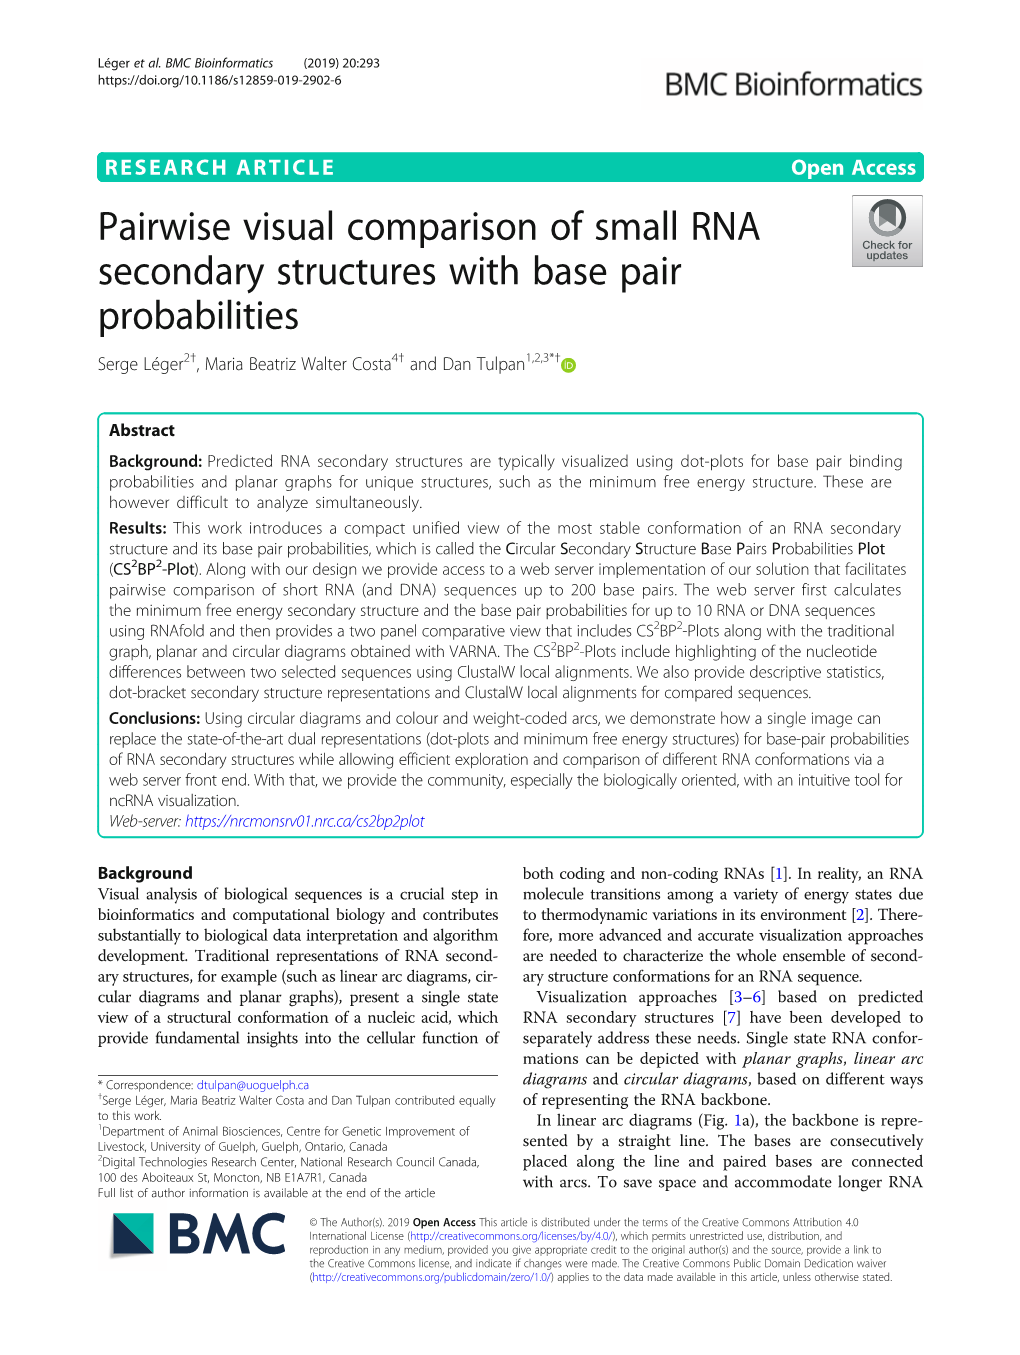 Pairwise Visual Comparison of Small RNA Secondary Structures with Base Pair Probabilities Serge Léger2†, Maria Beatriz Walter Costa4† and Dan Tulpan1,2,3*†